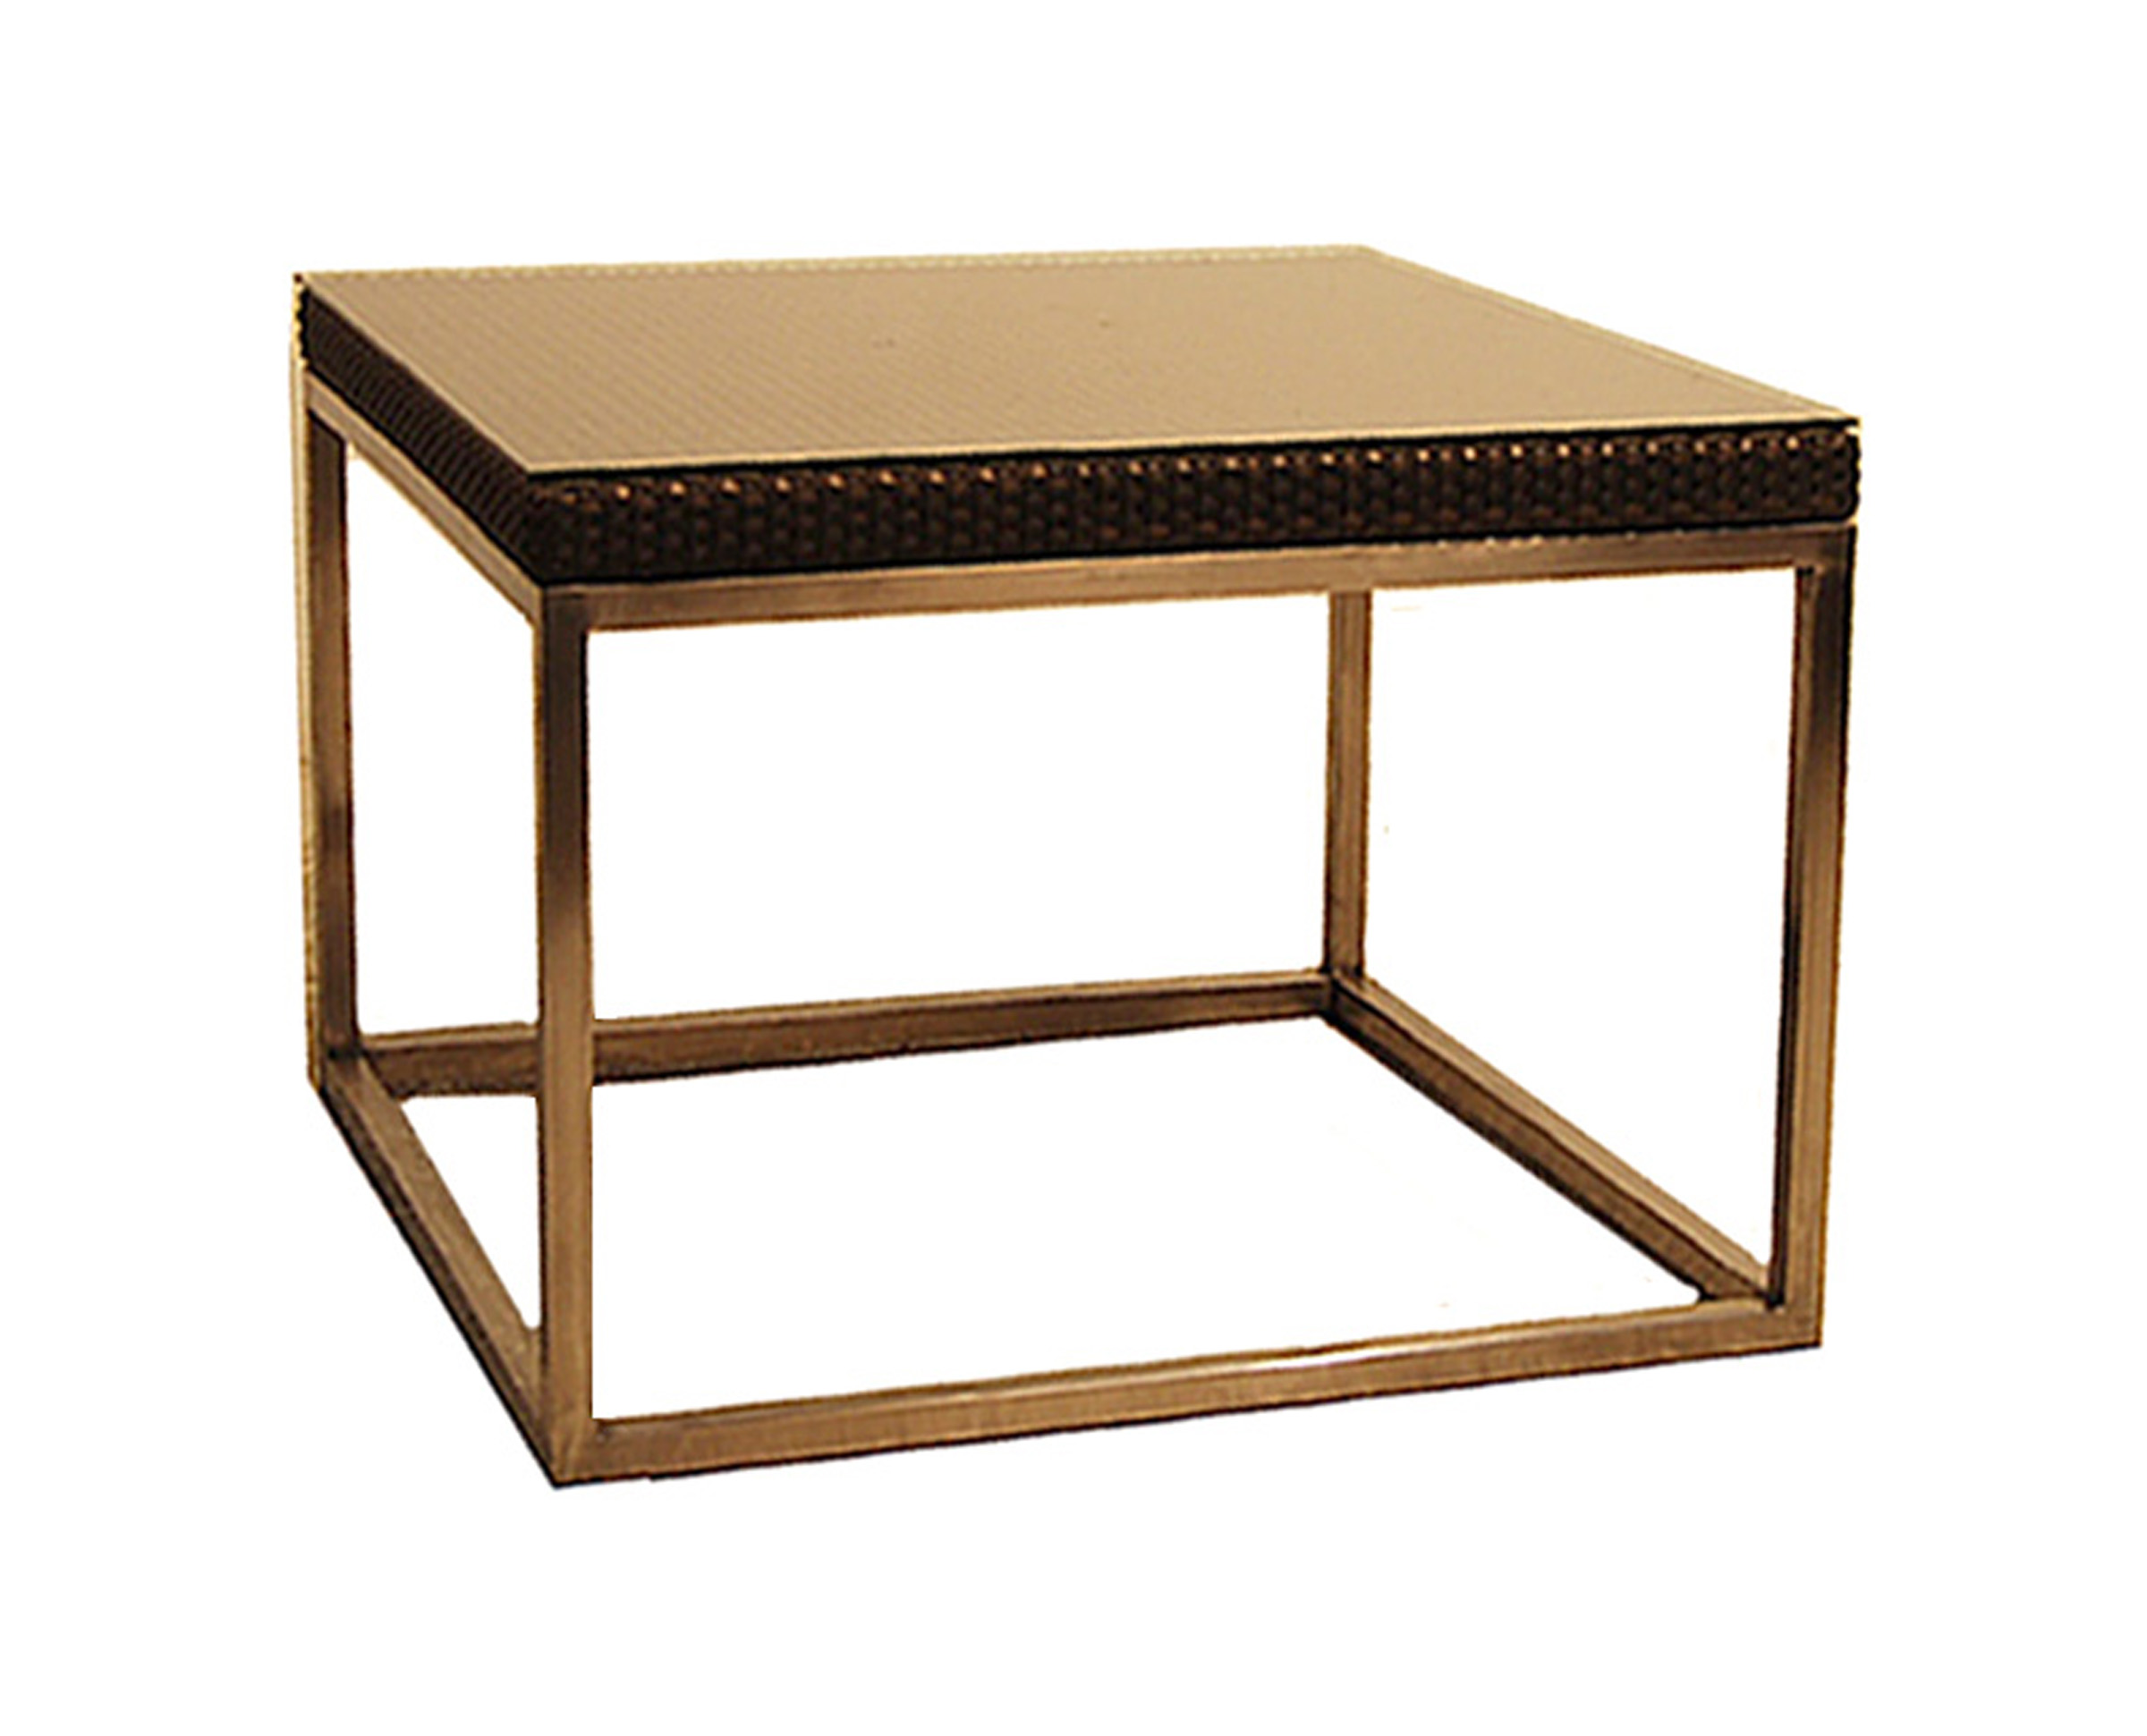 FB-5555-C-1 STAINLESS STEEL AND RESIN SIDE TABLE